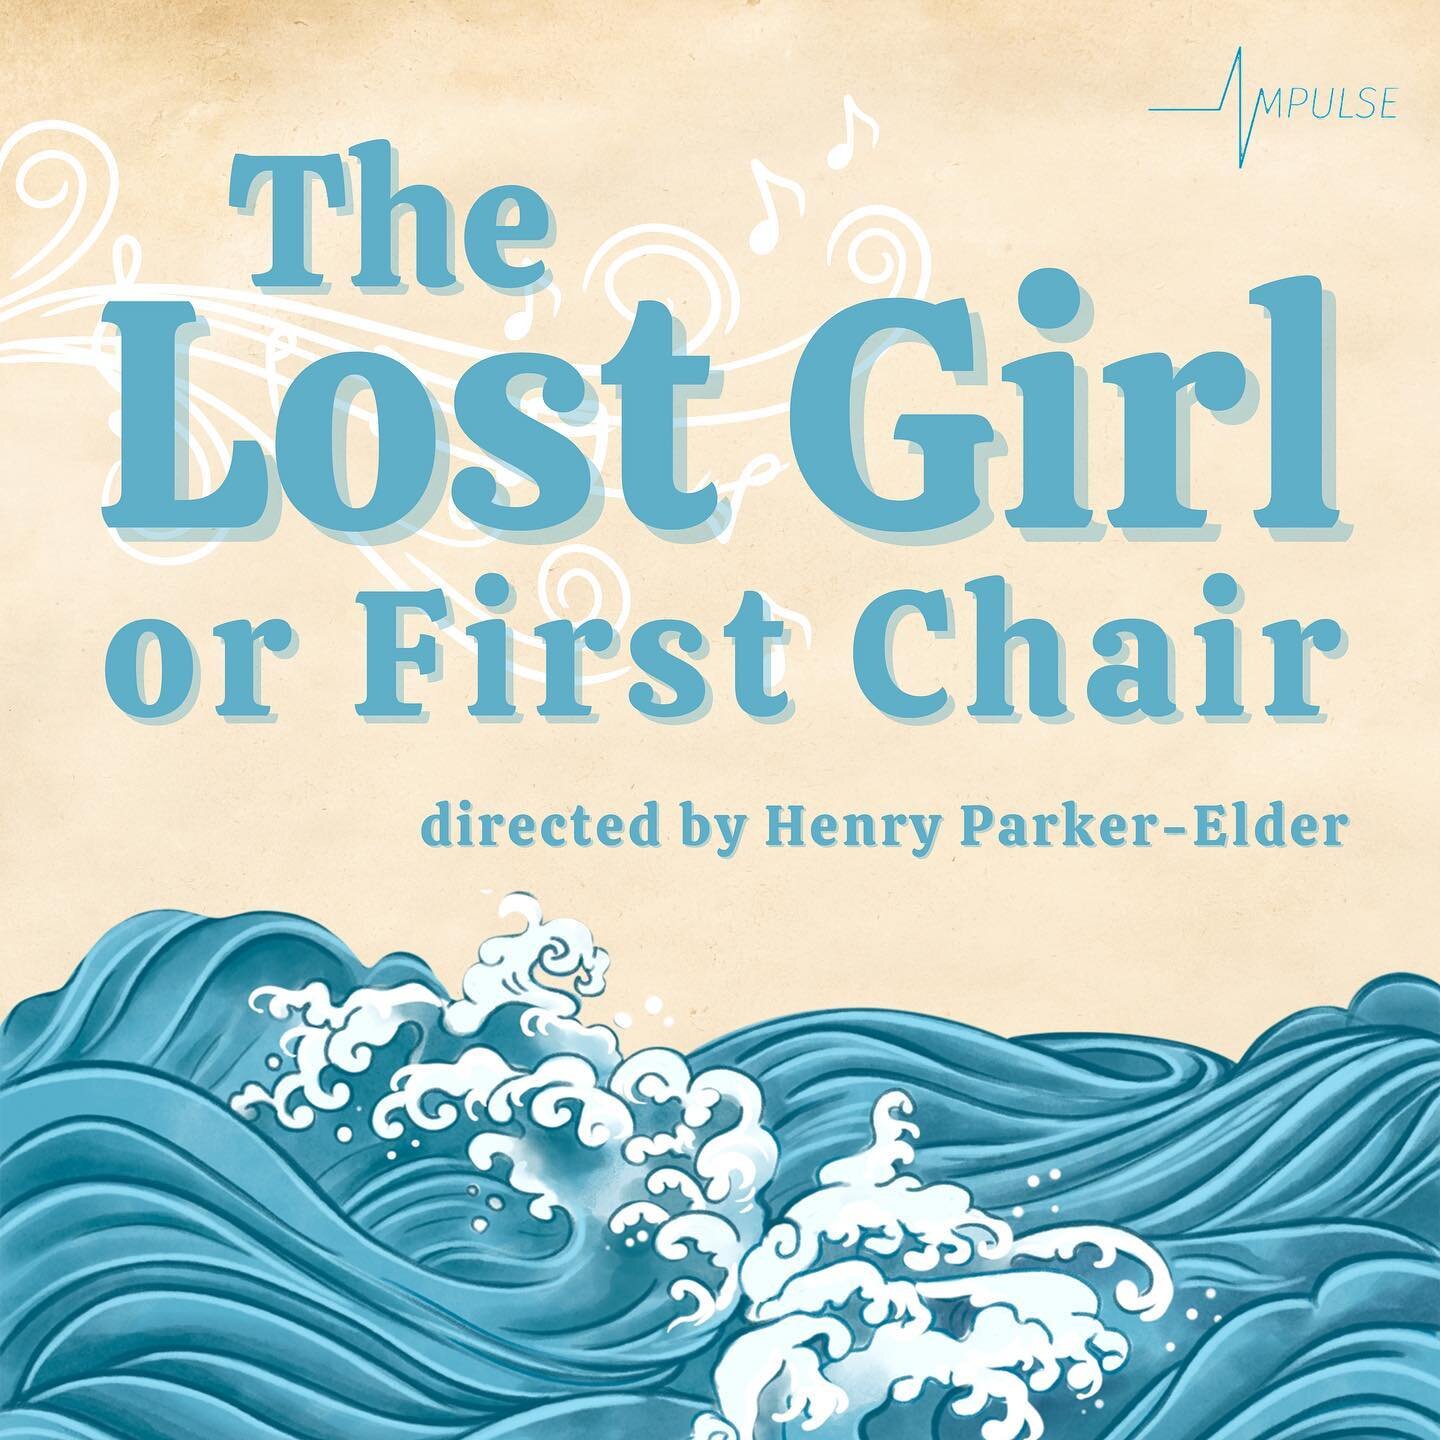 Impulse is so proud to announce our Spring One-Act: The Lost Girl, or First Chair, directed by the incredibly talented Henry Parker-Elder! Stay tuned for info regarding auditions and tech applications, coming very soon&hellip;💜🌊🎼🎻